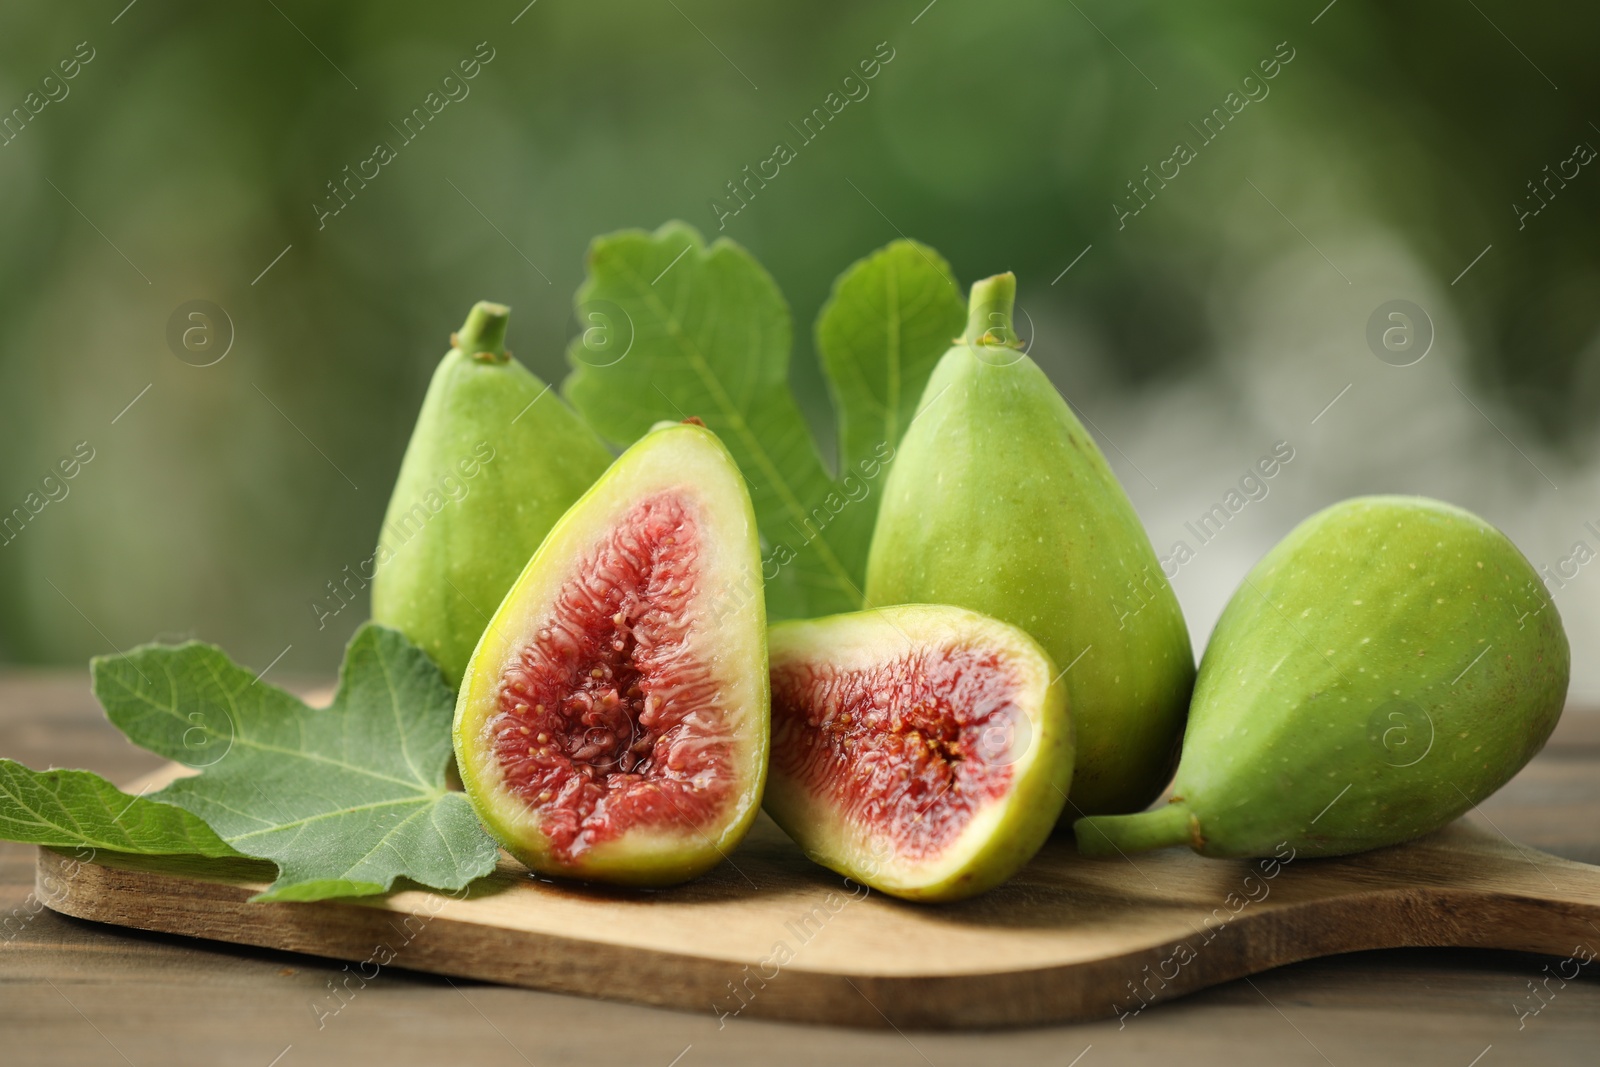 Photo of Cut and whole green figs on table against blurred background, closeup